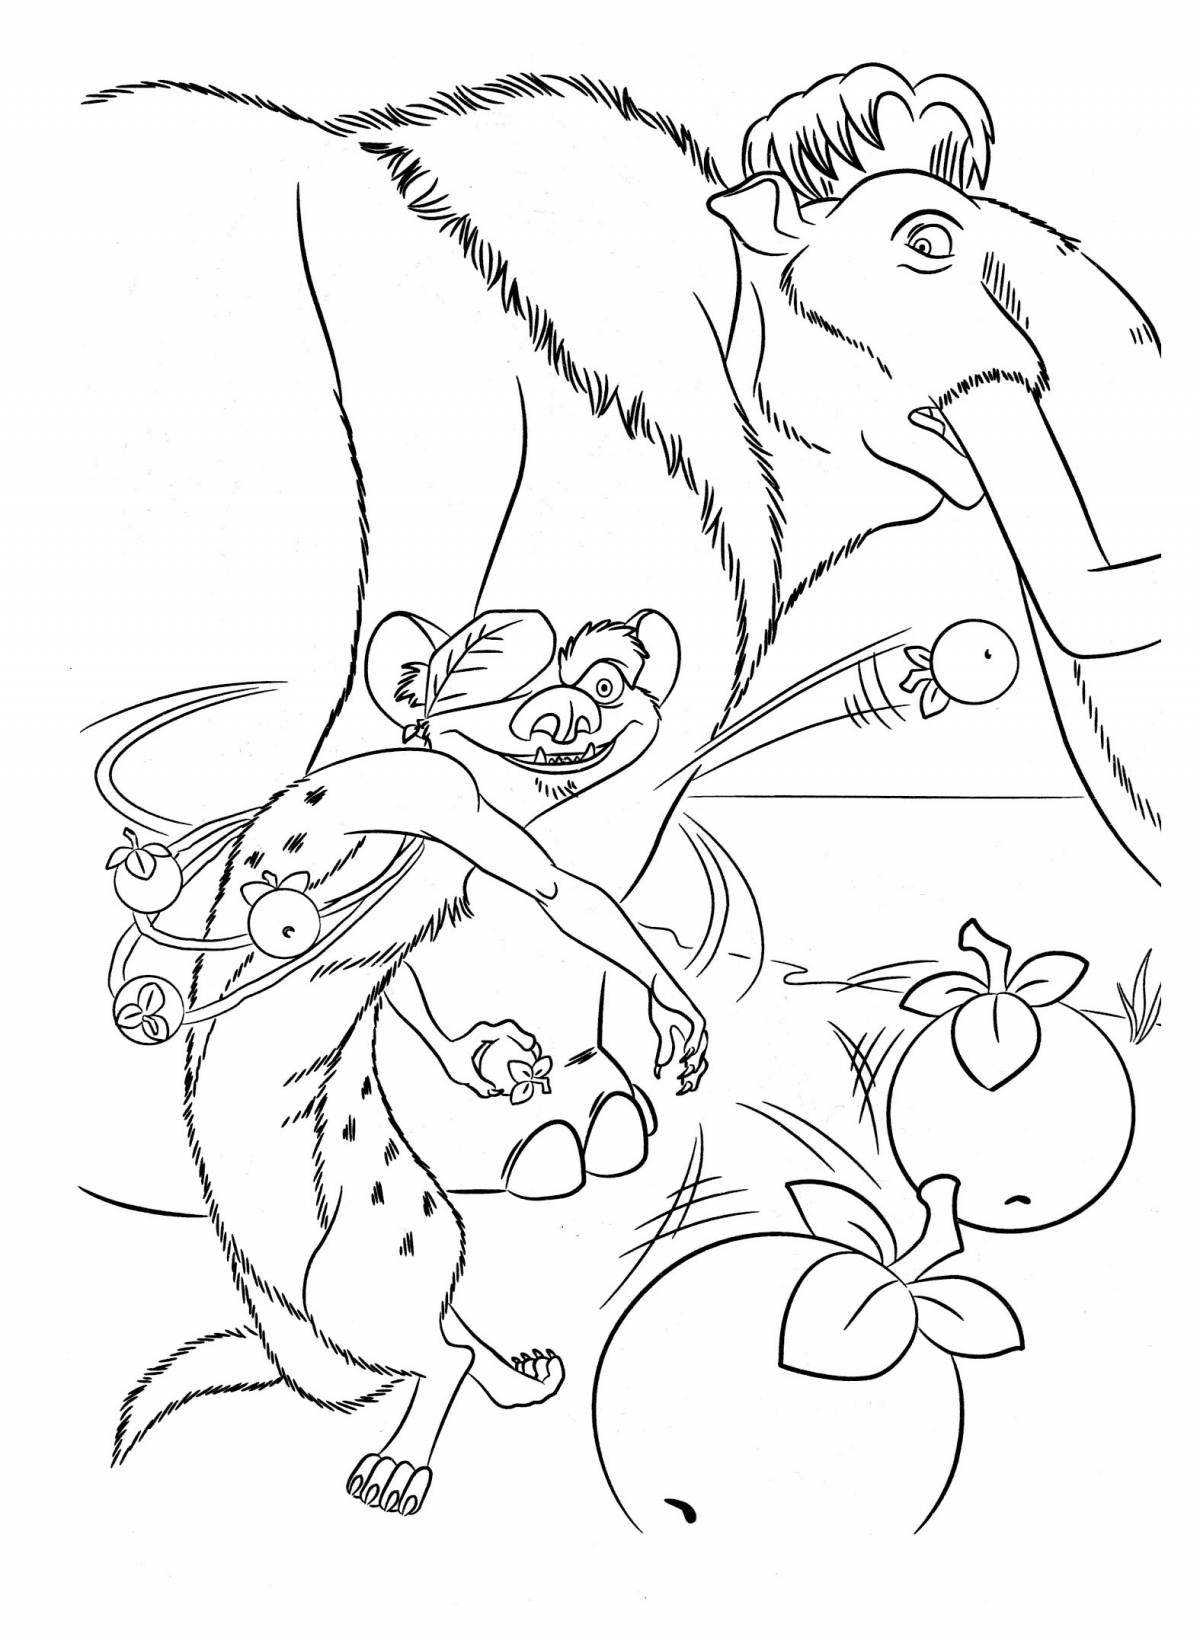 Playful ice age 3 coloring page